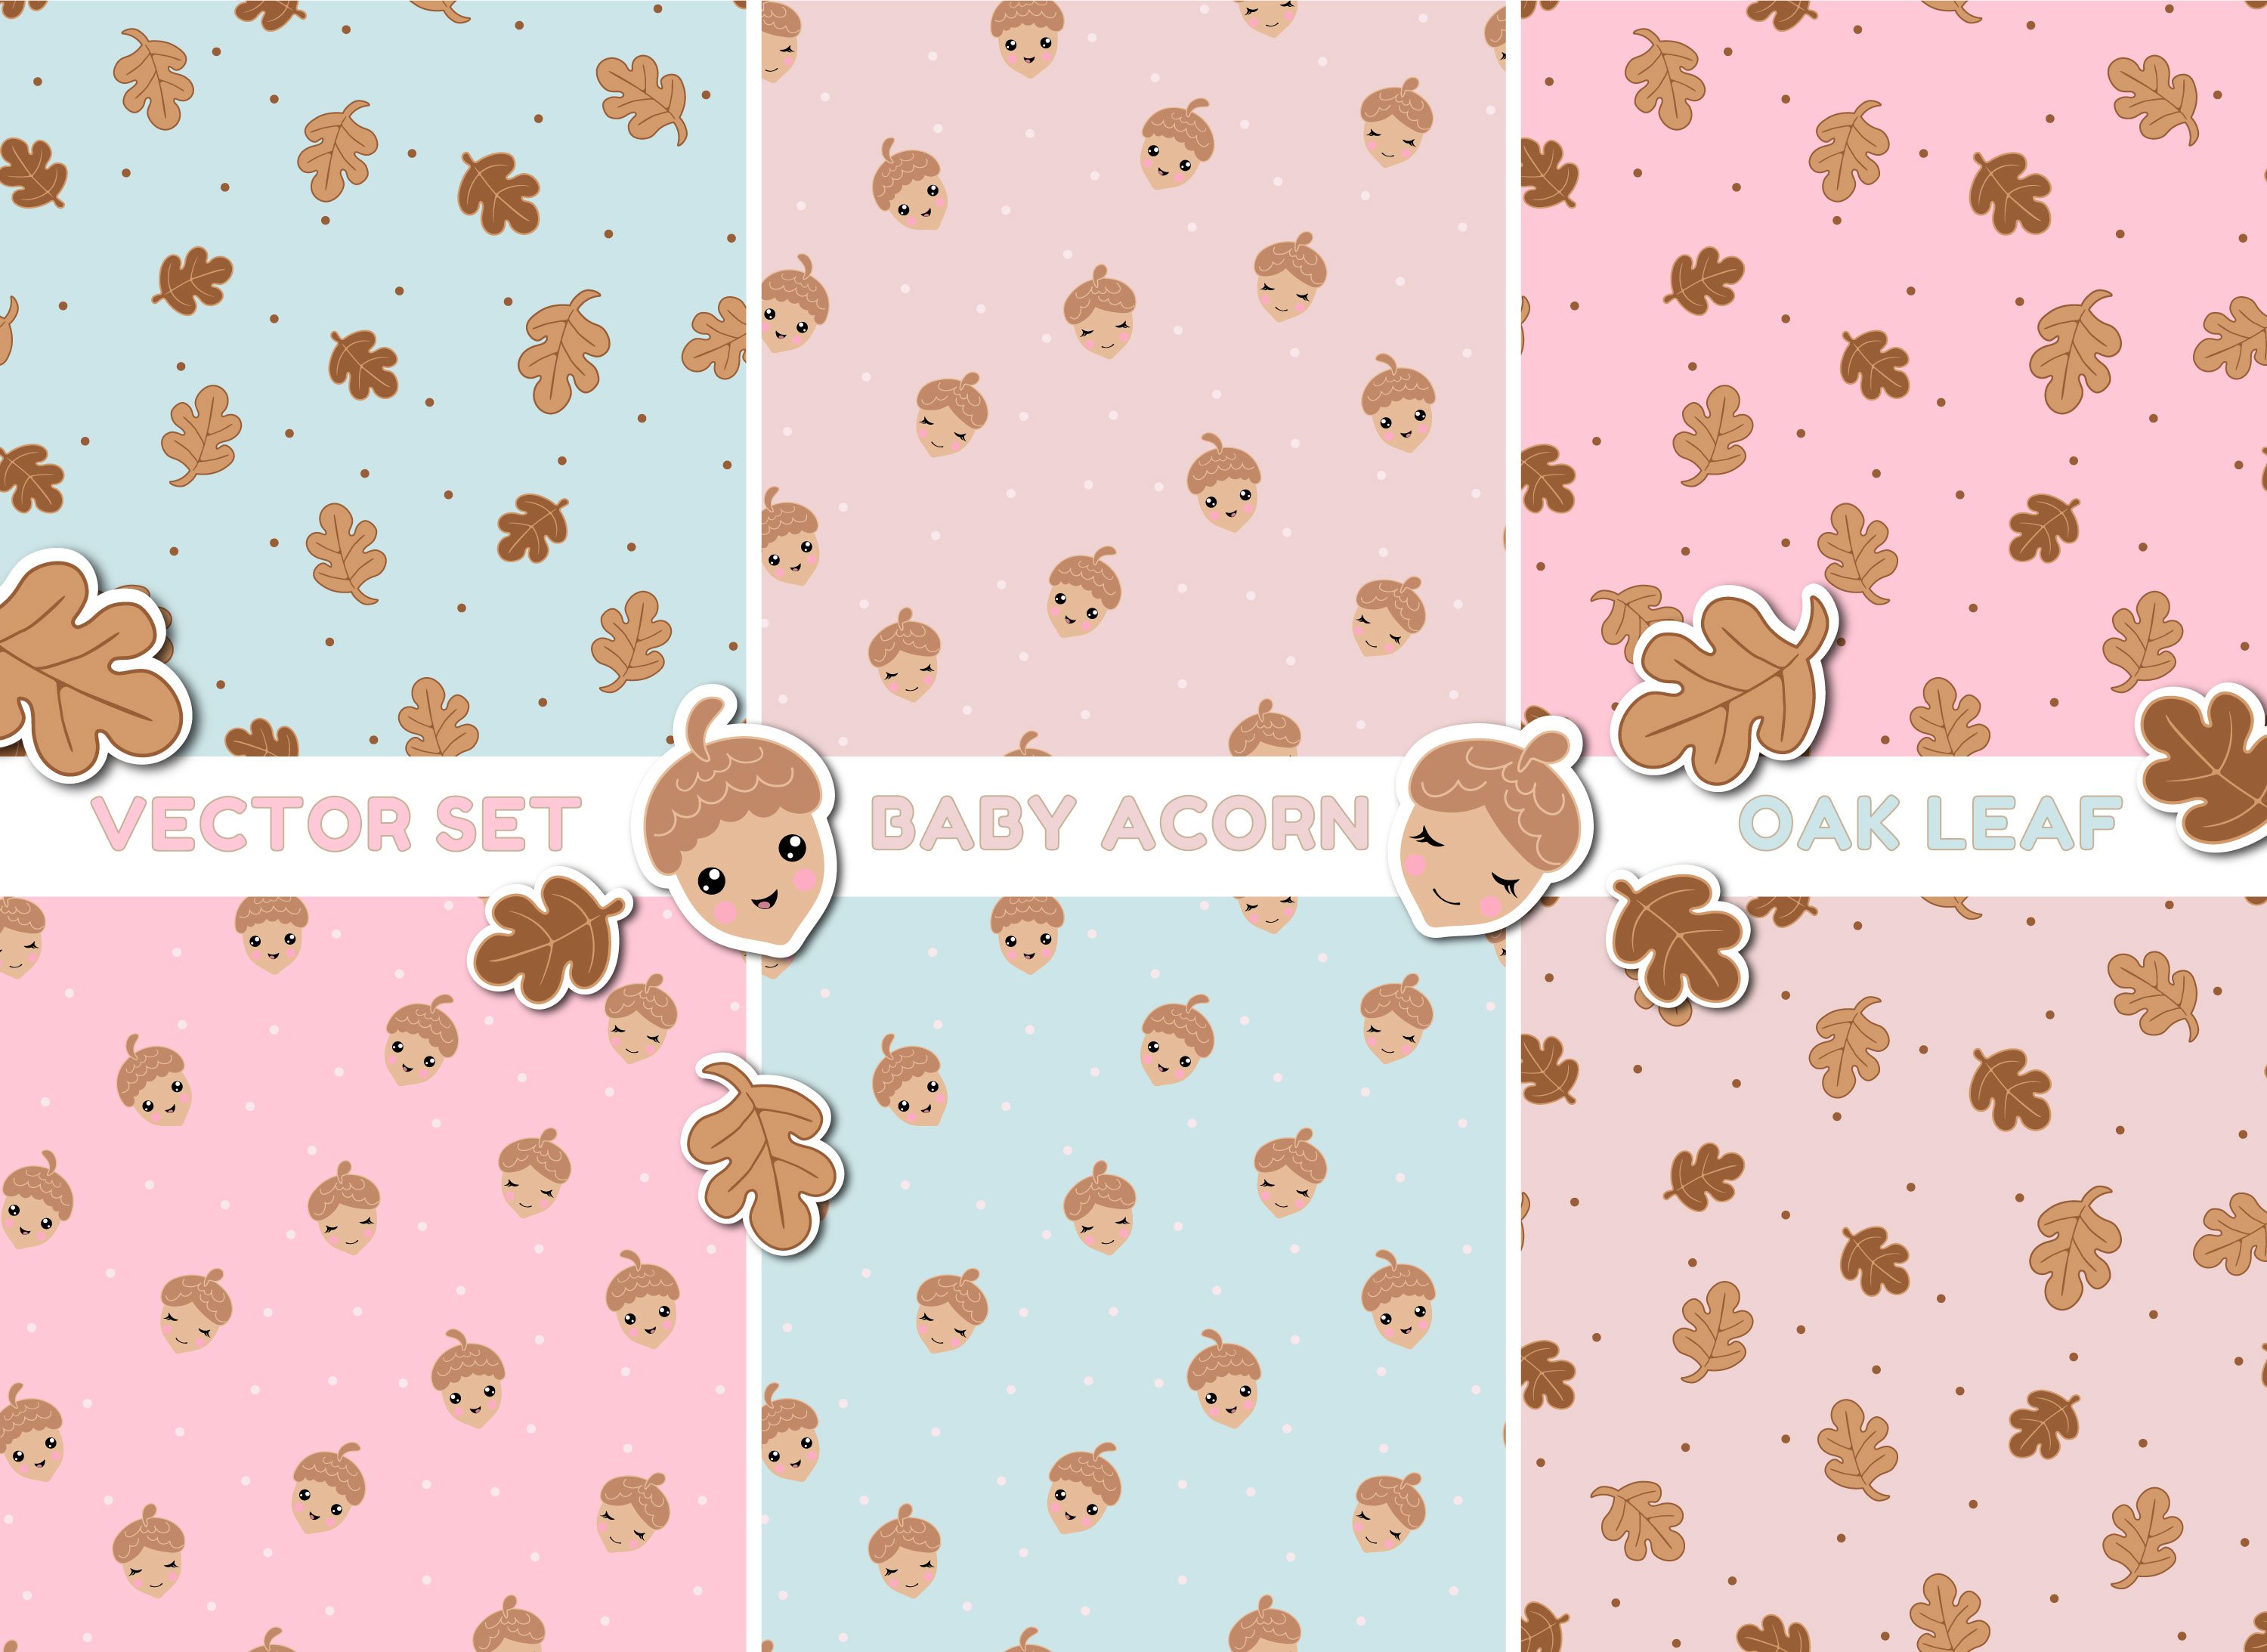 BABY ACORN  vector seamless patterns cover image.